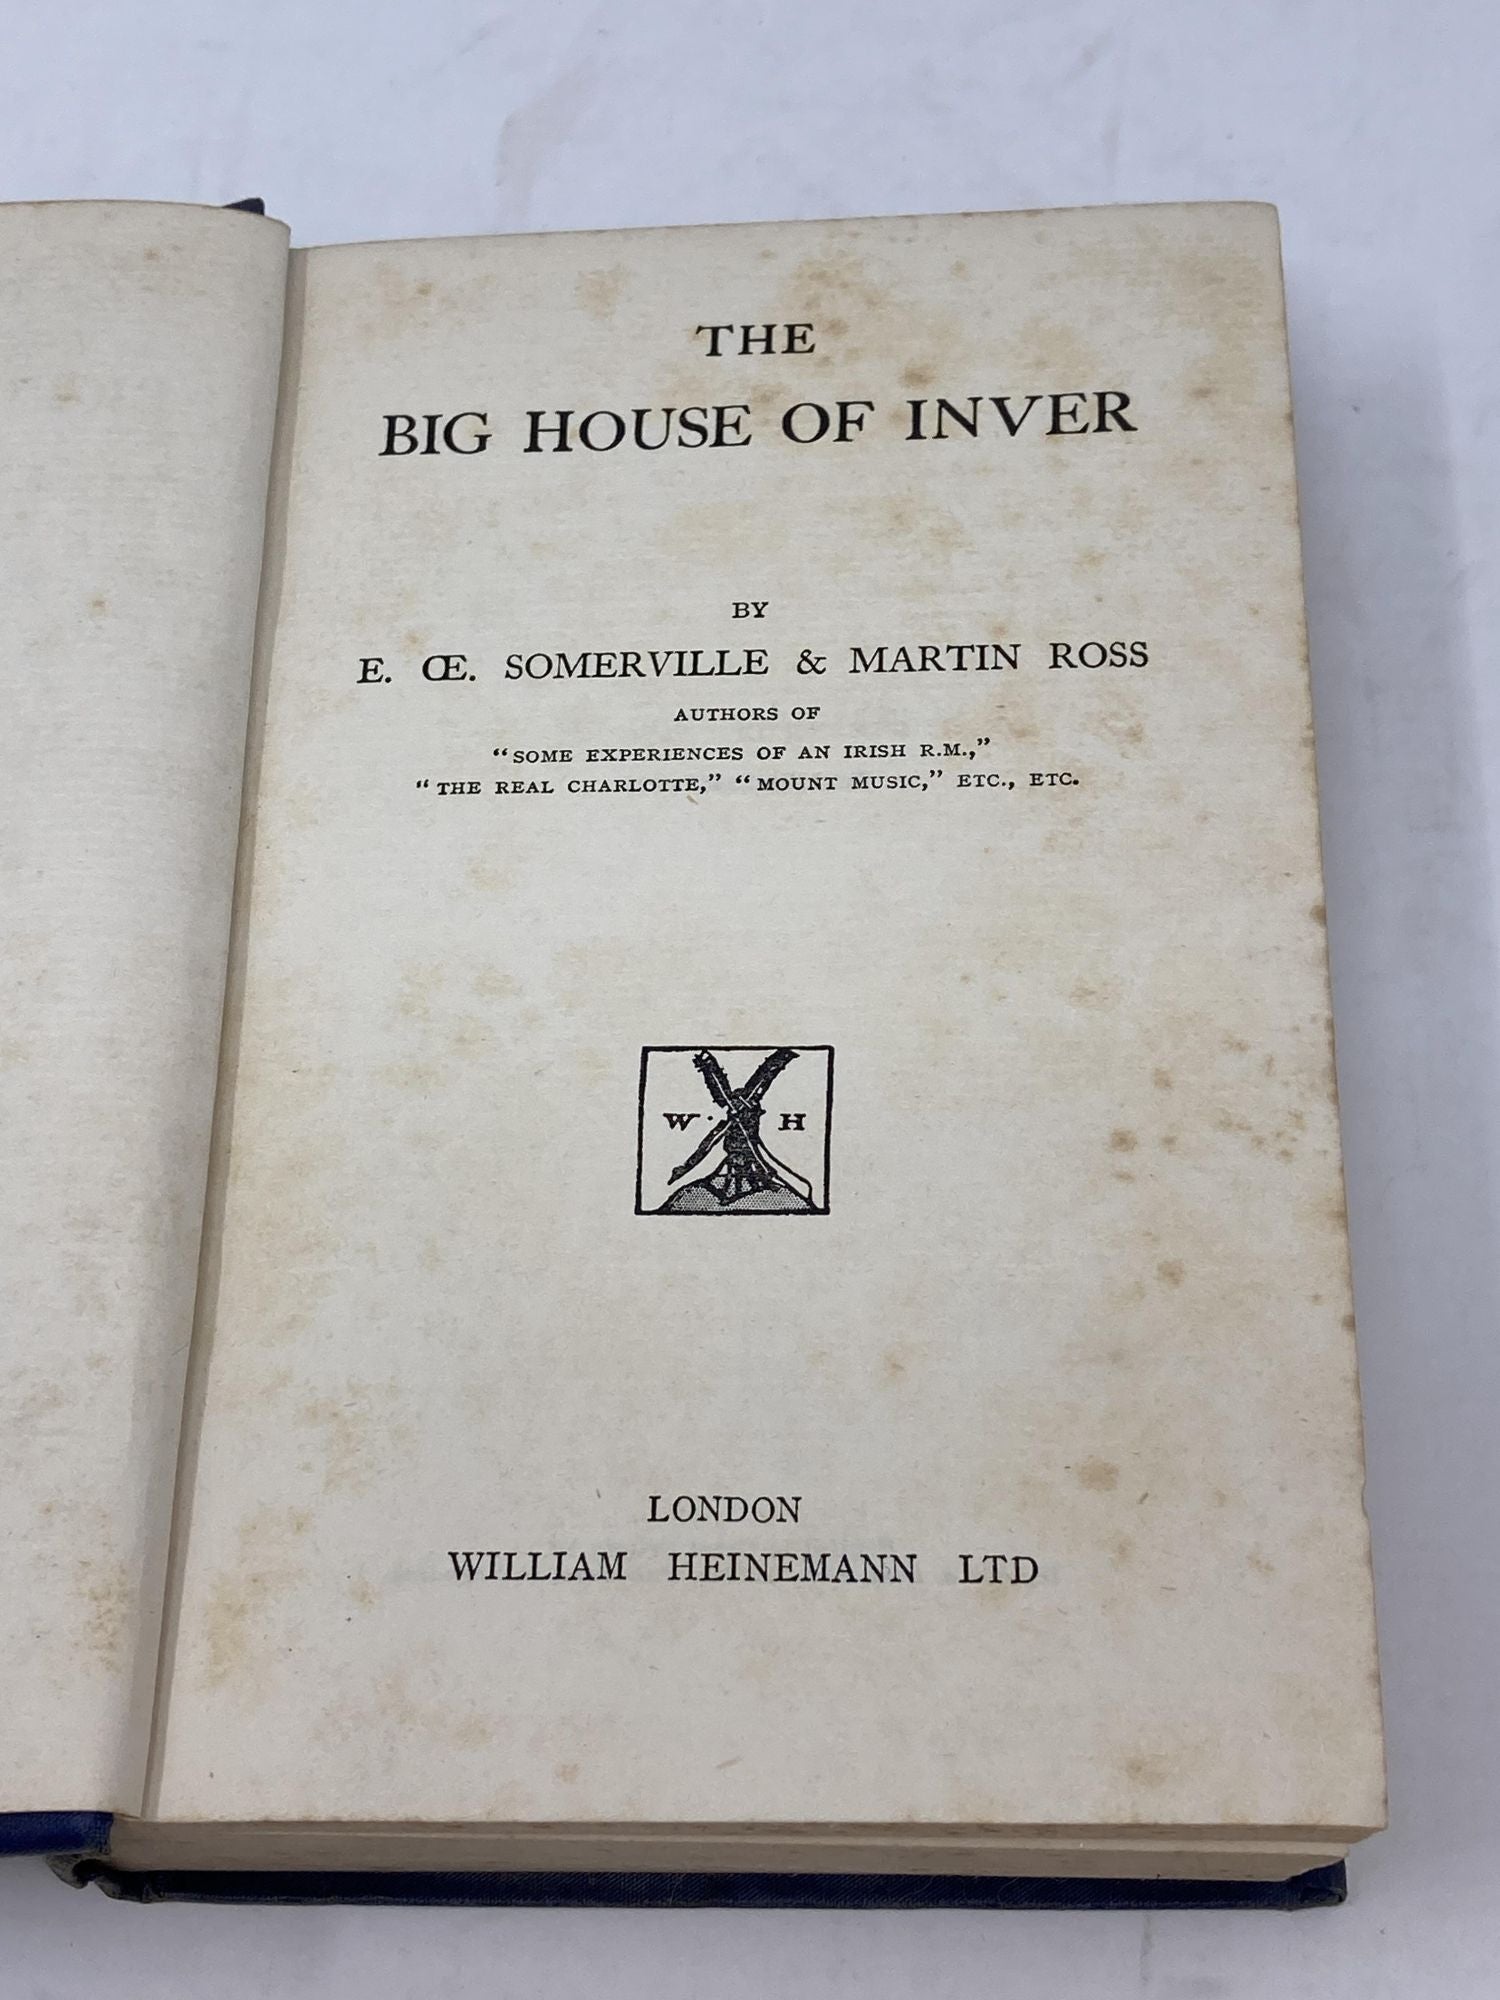 Somerville, O. OE. (Edith Anna Œnone Somerville) and Martin Ross - The Big House of Inver